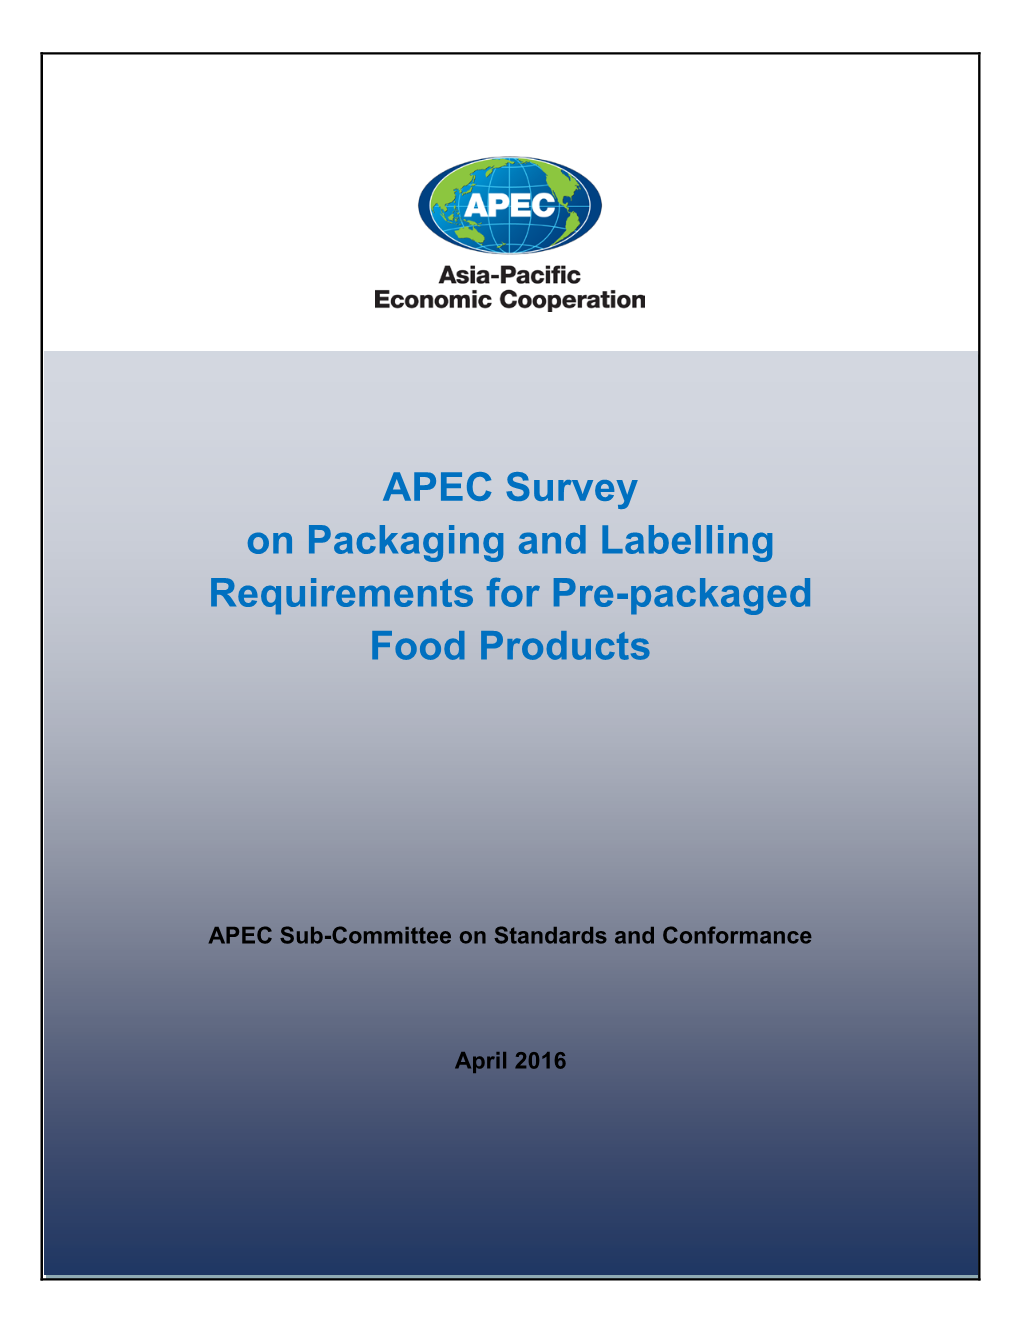 APEC Survey on Packaging and Labelling Requirements for Pre-Packaged Food Products